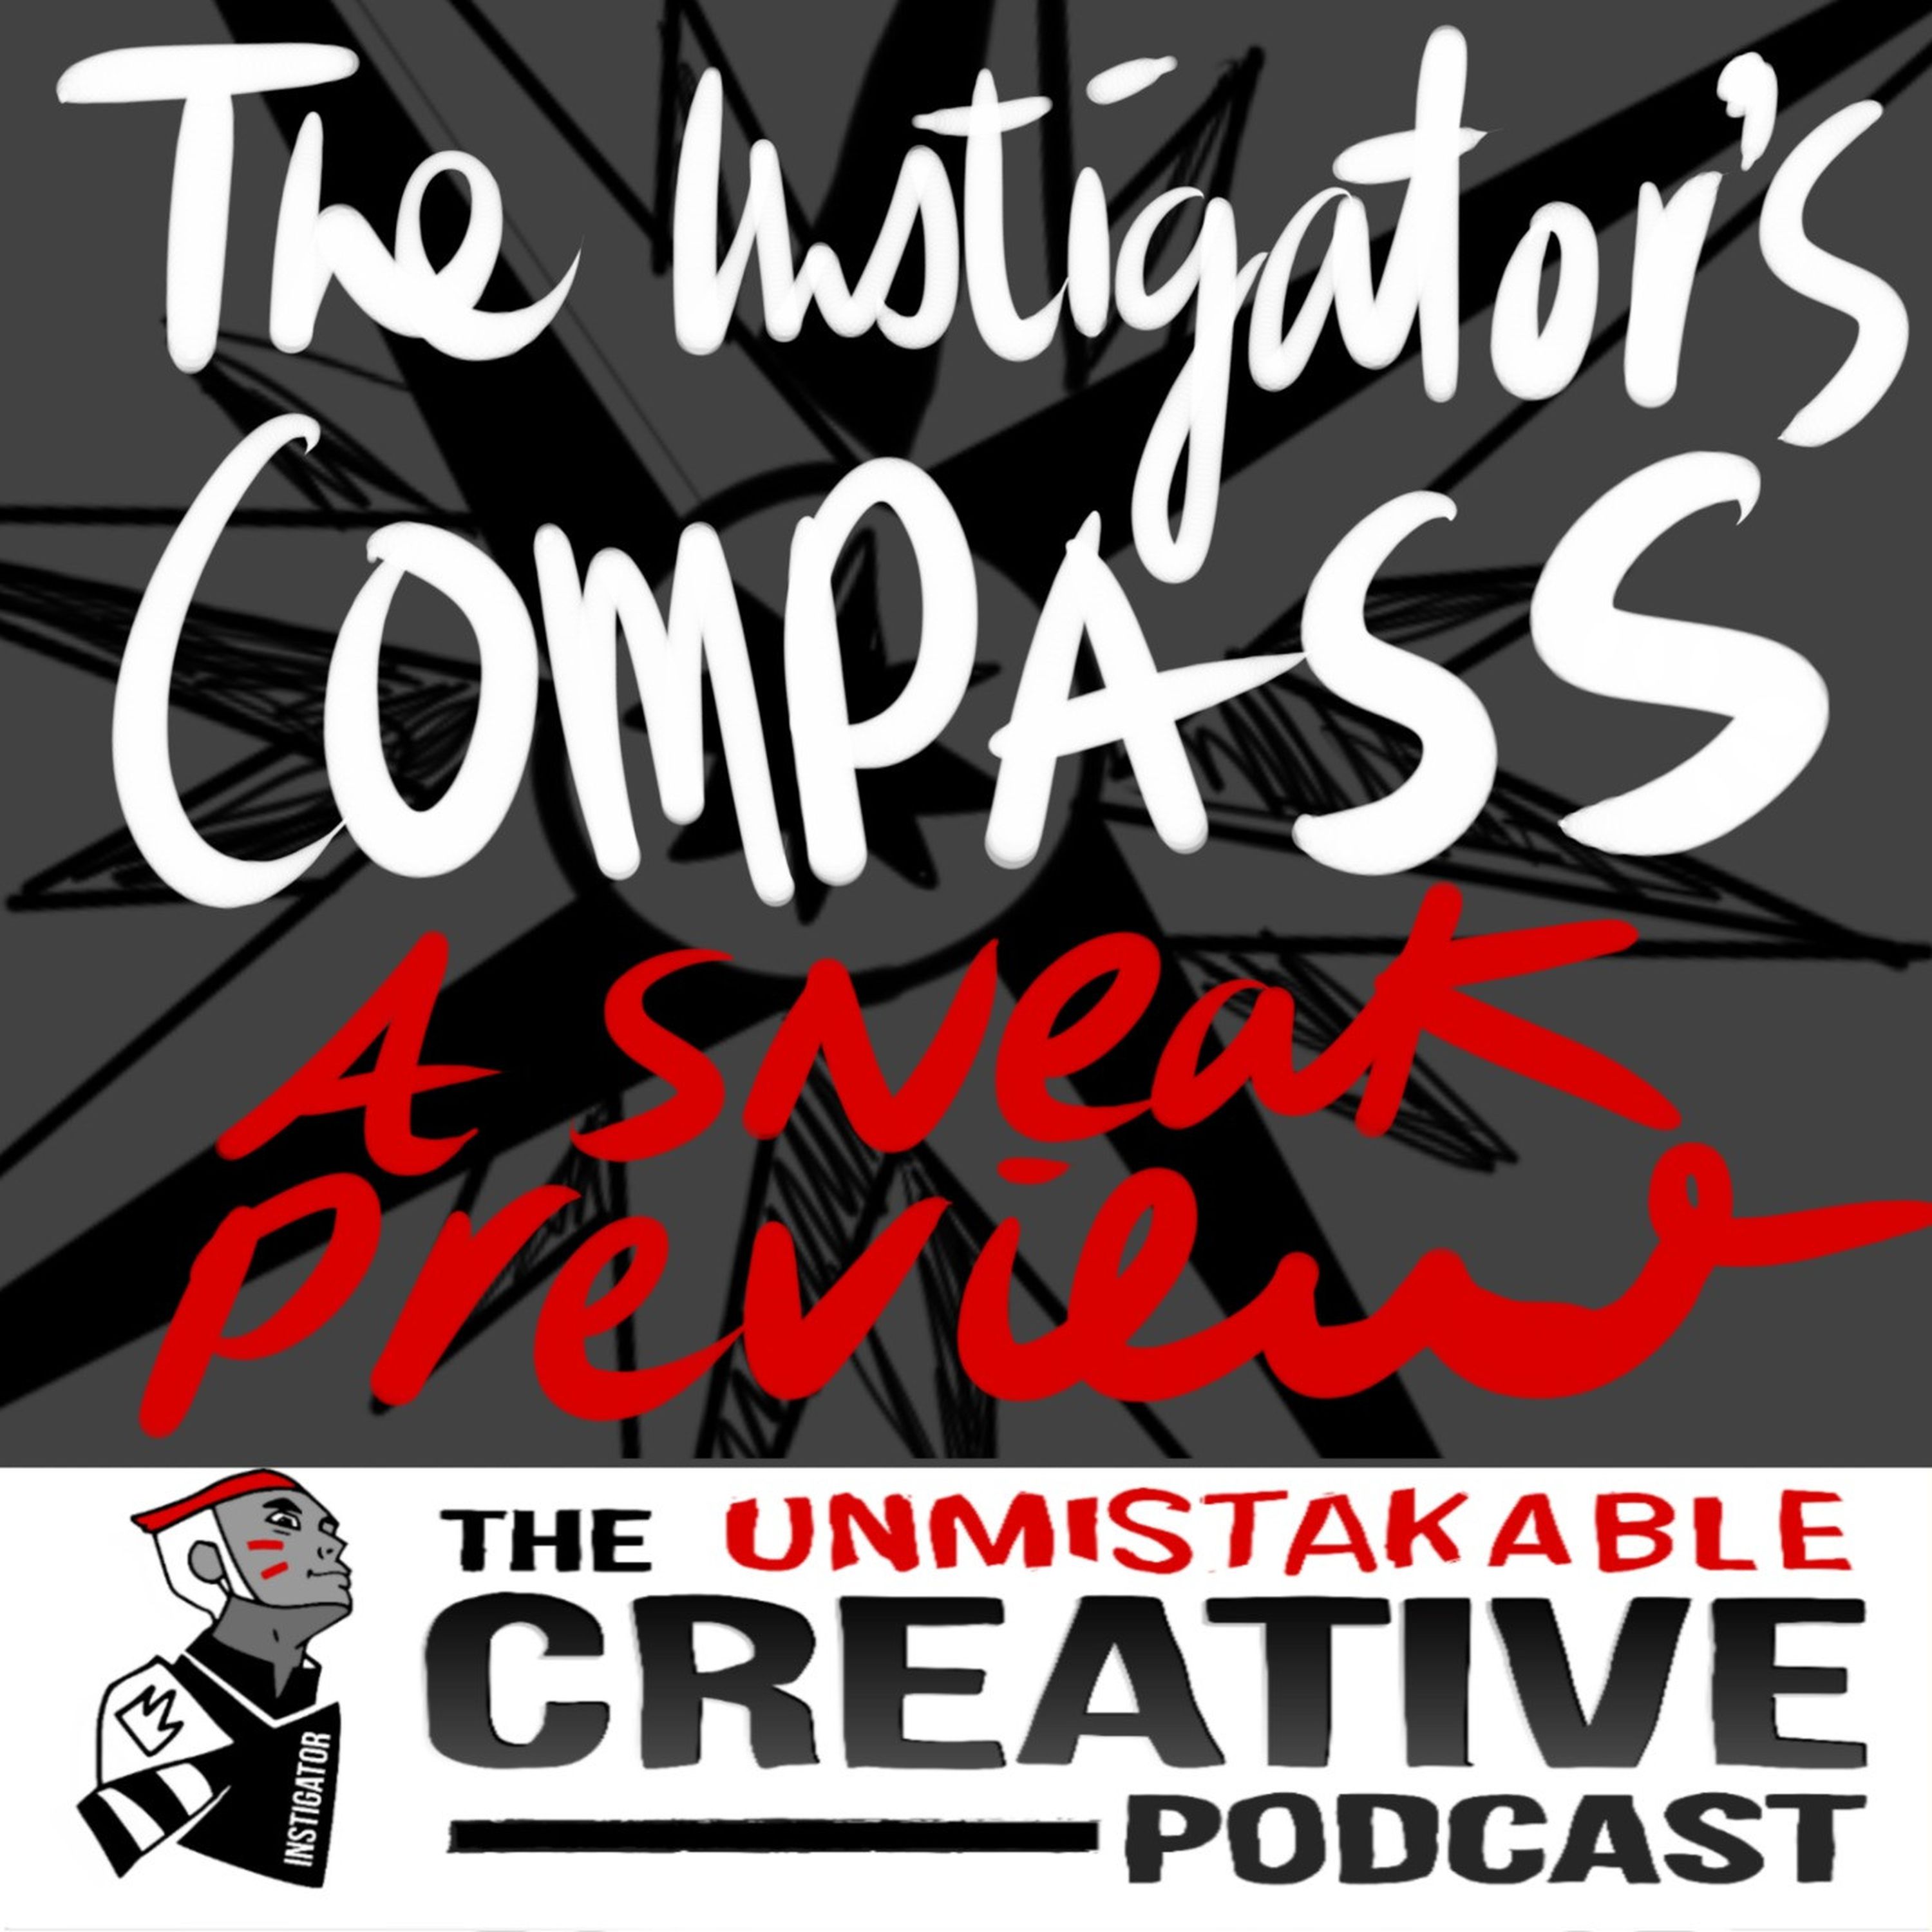 The Instigator’s Compass: A Sneak Preview